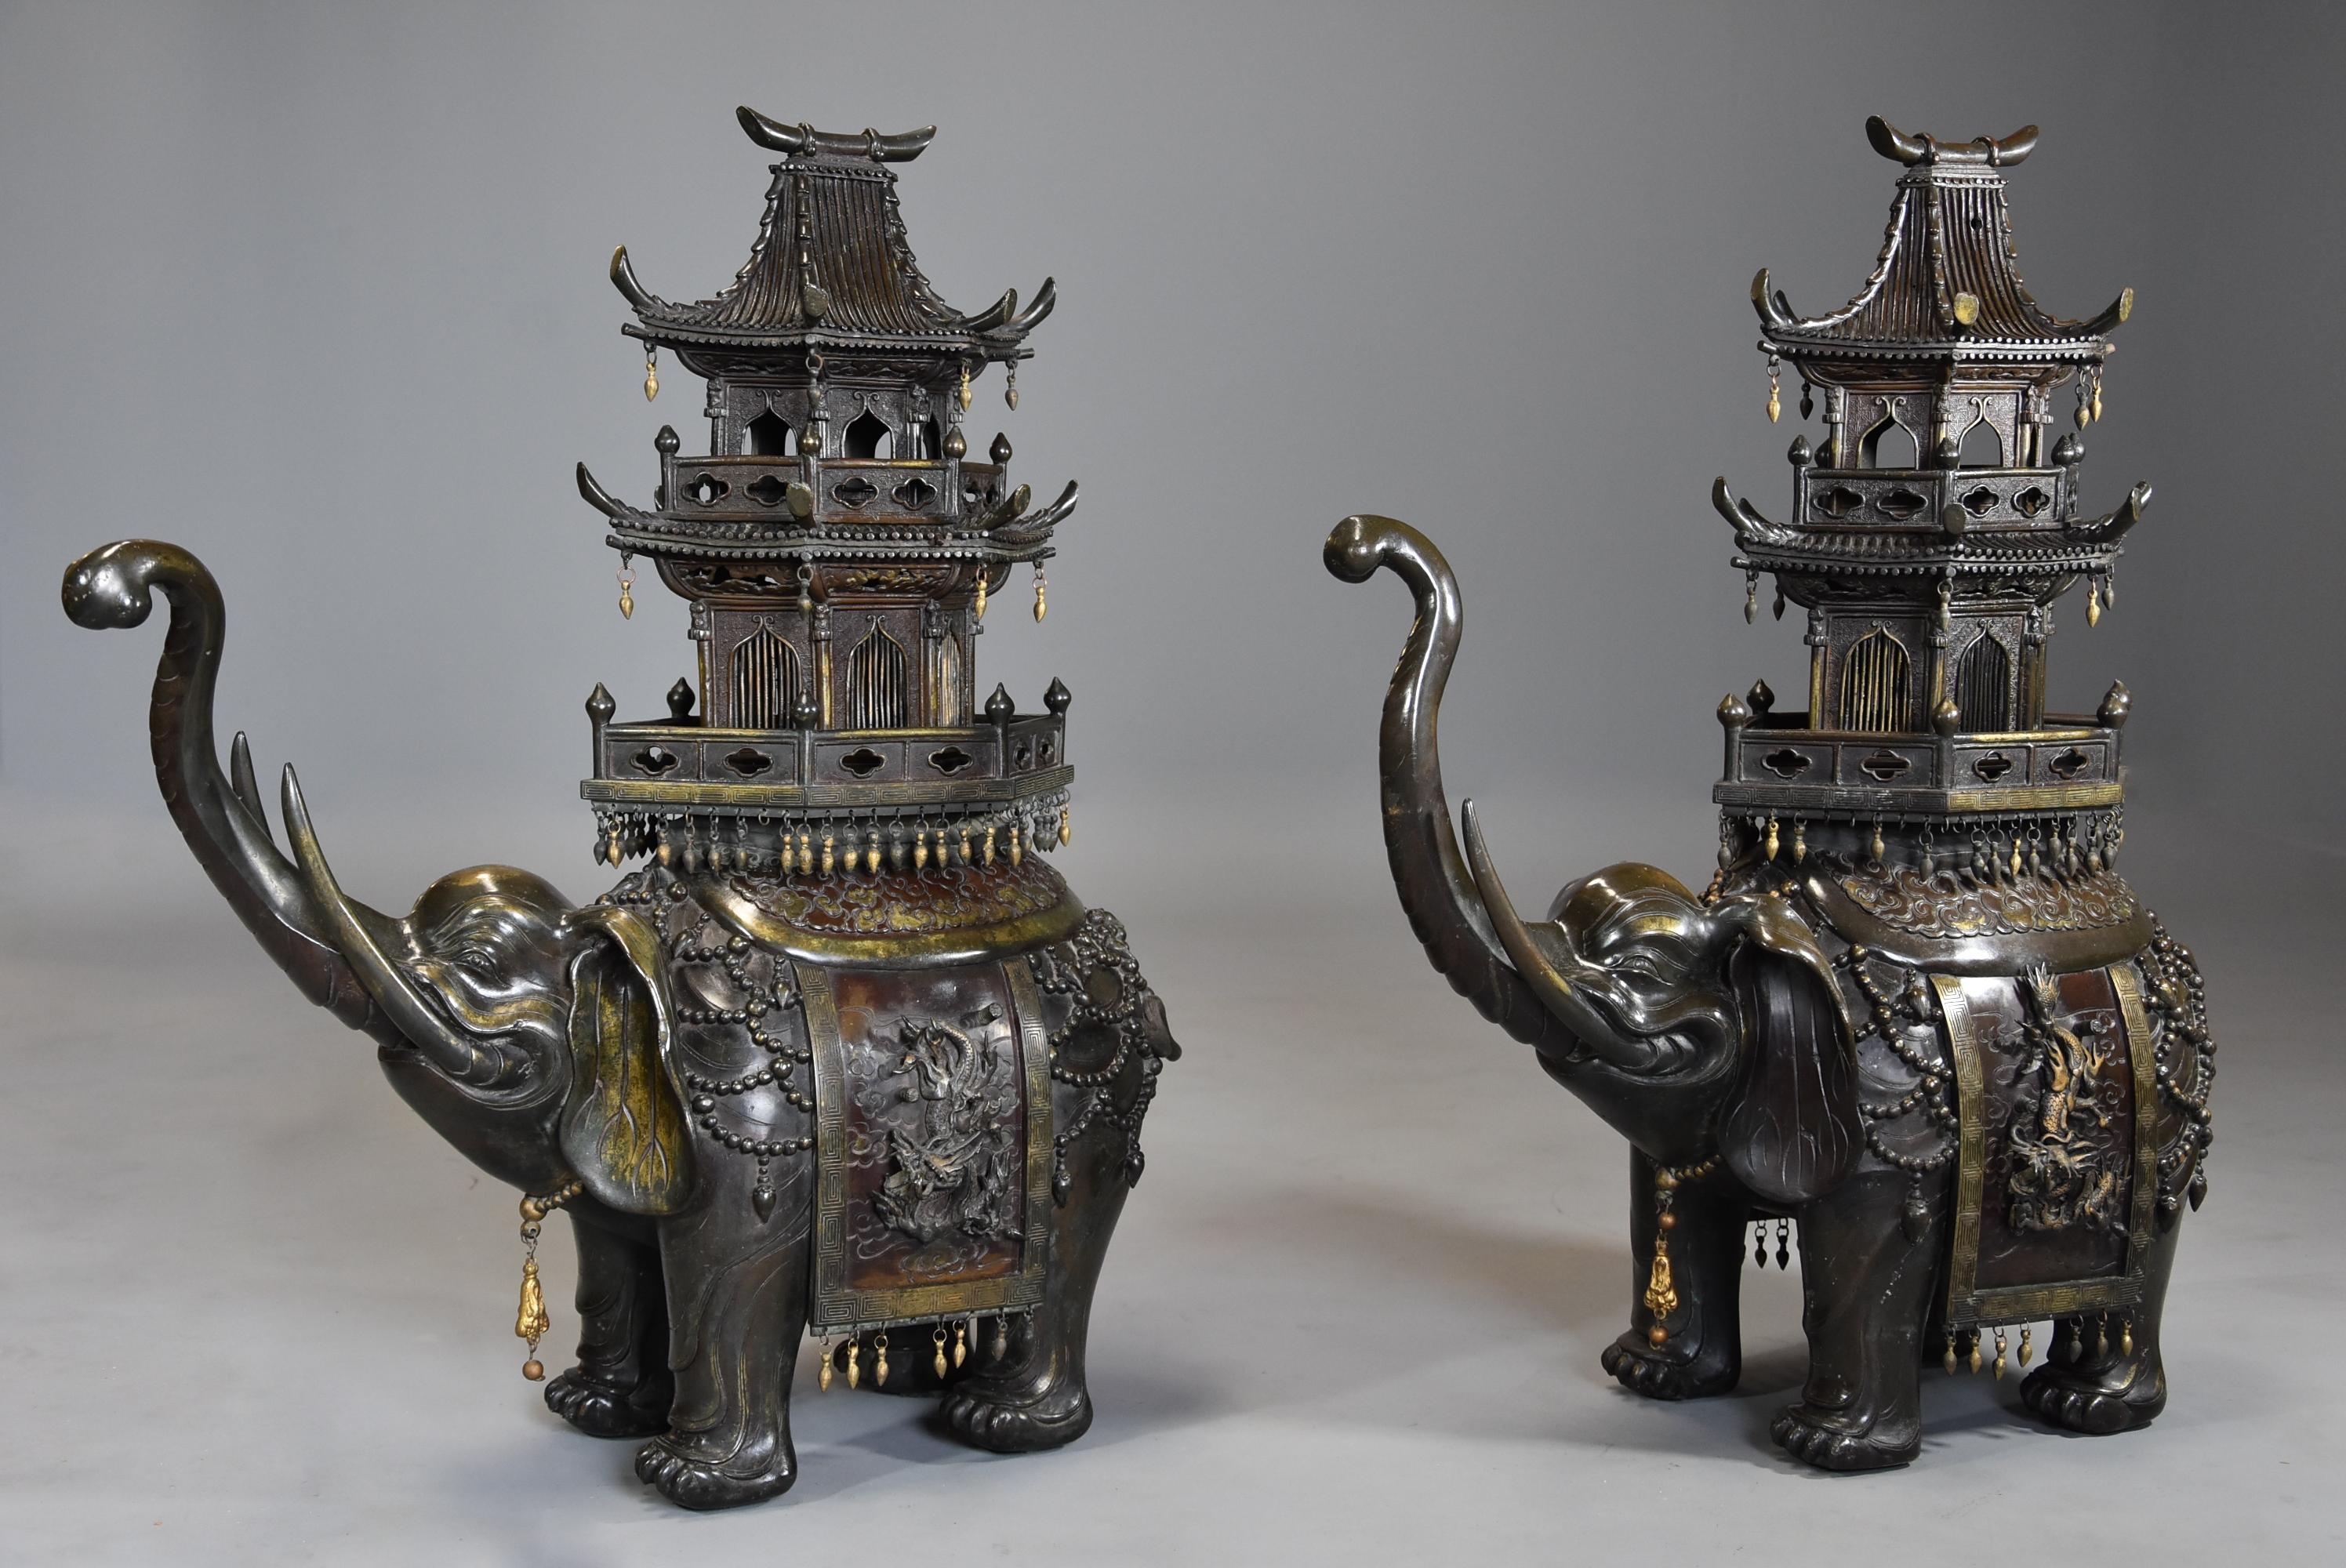 A large superbly fine pair of late 19th century Japanese Meiji bronze elephant incense burners or koro with pagoda temple covers.

This wonderful pair of incense burners consist of a pair of fine quality bronze and gilt bronze elephants with